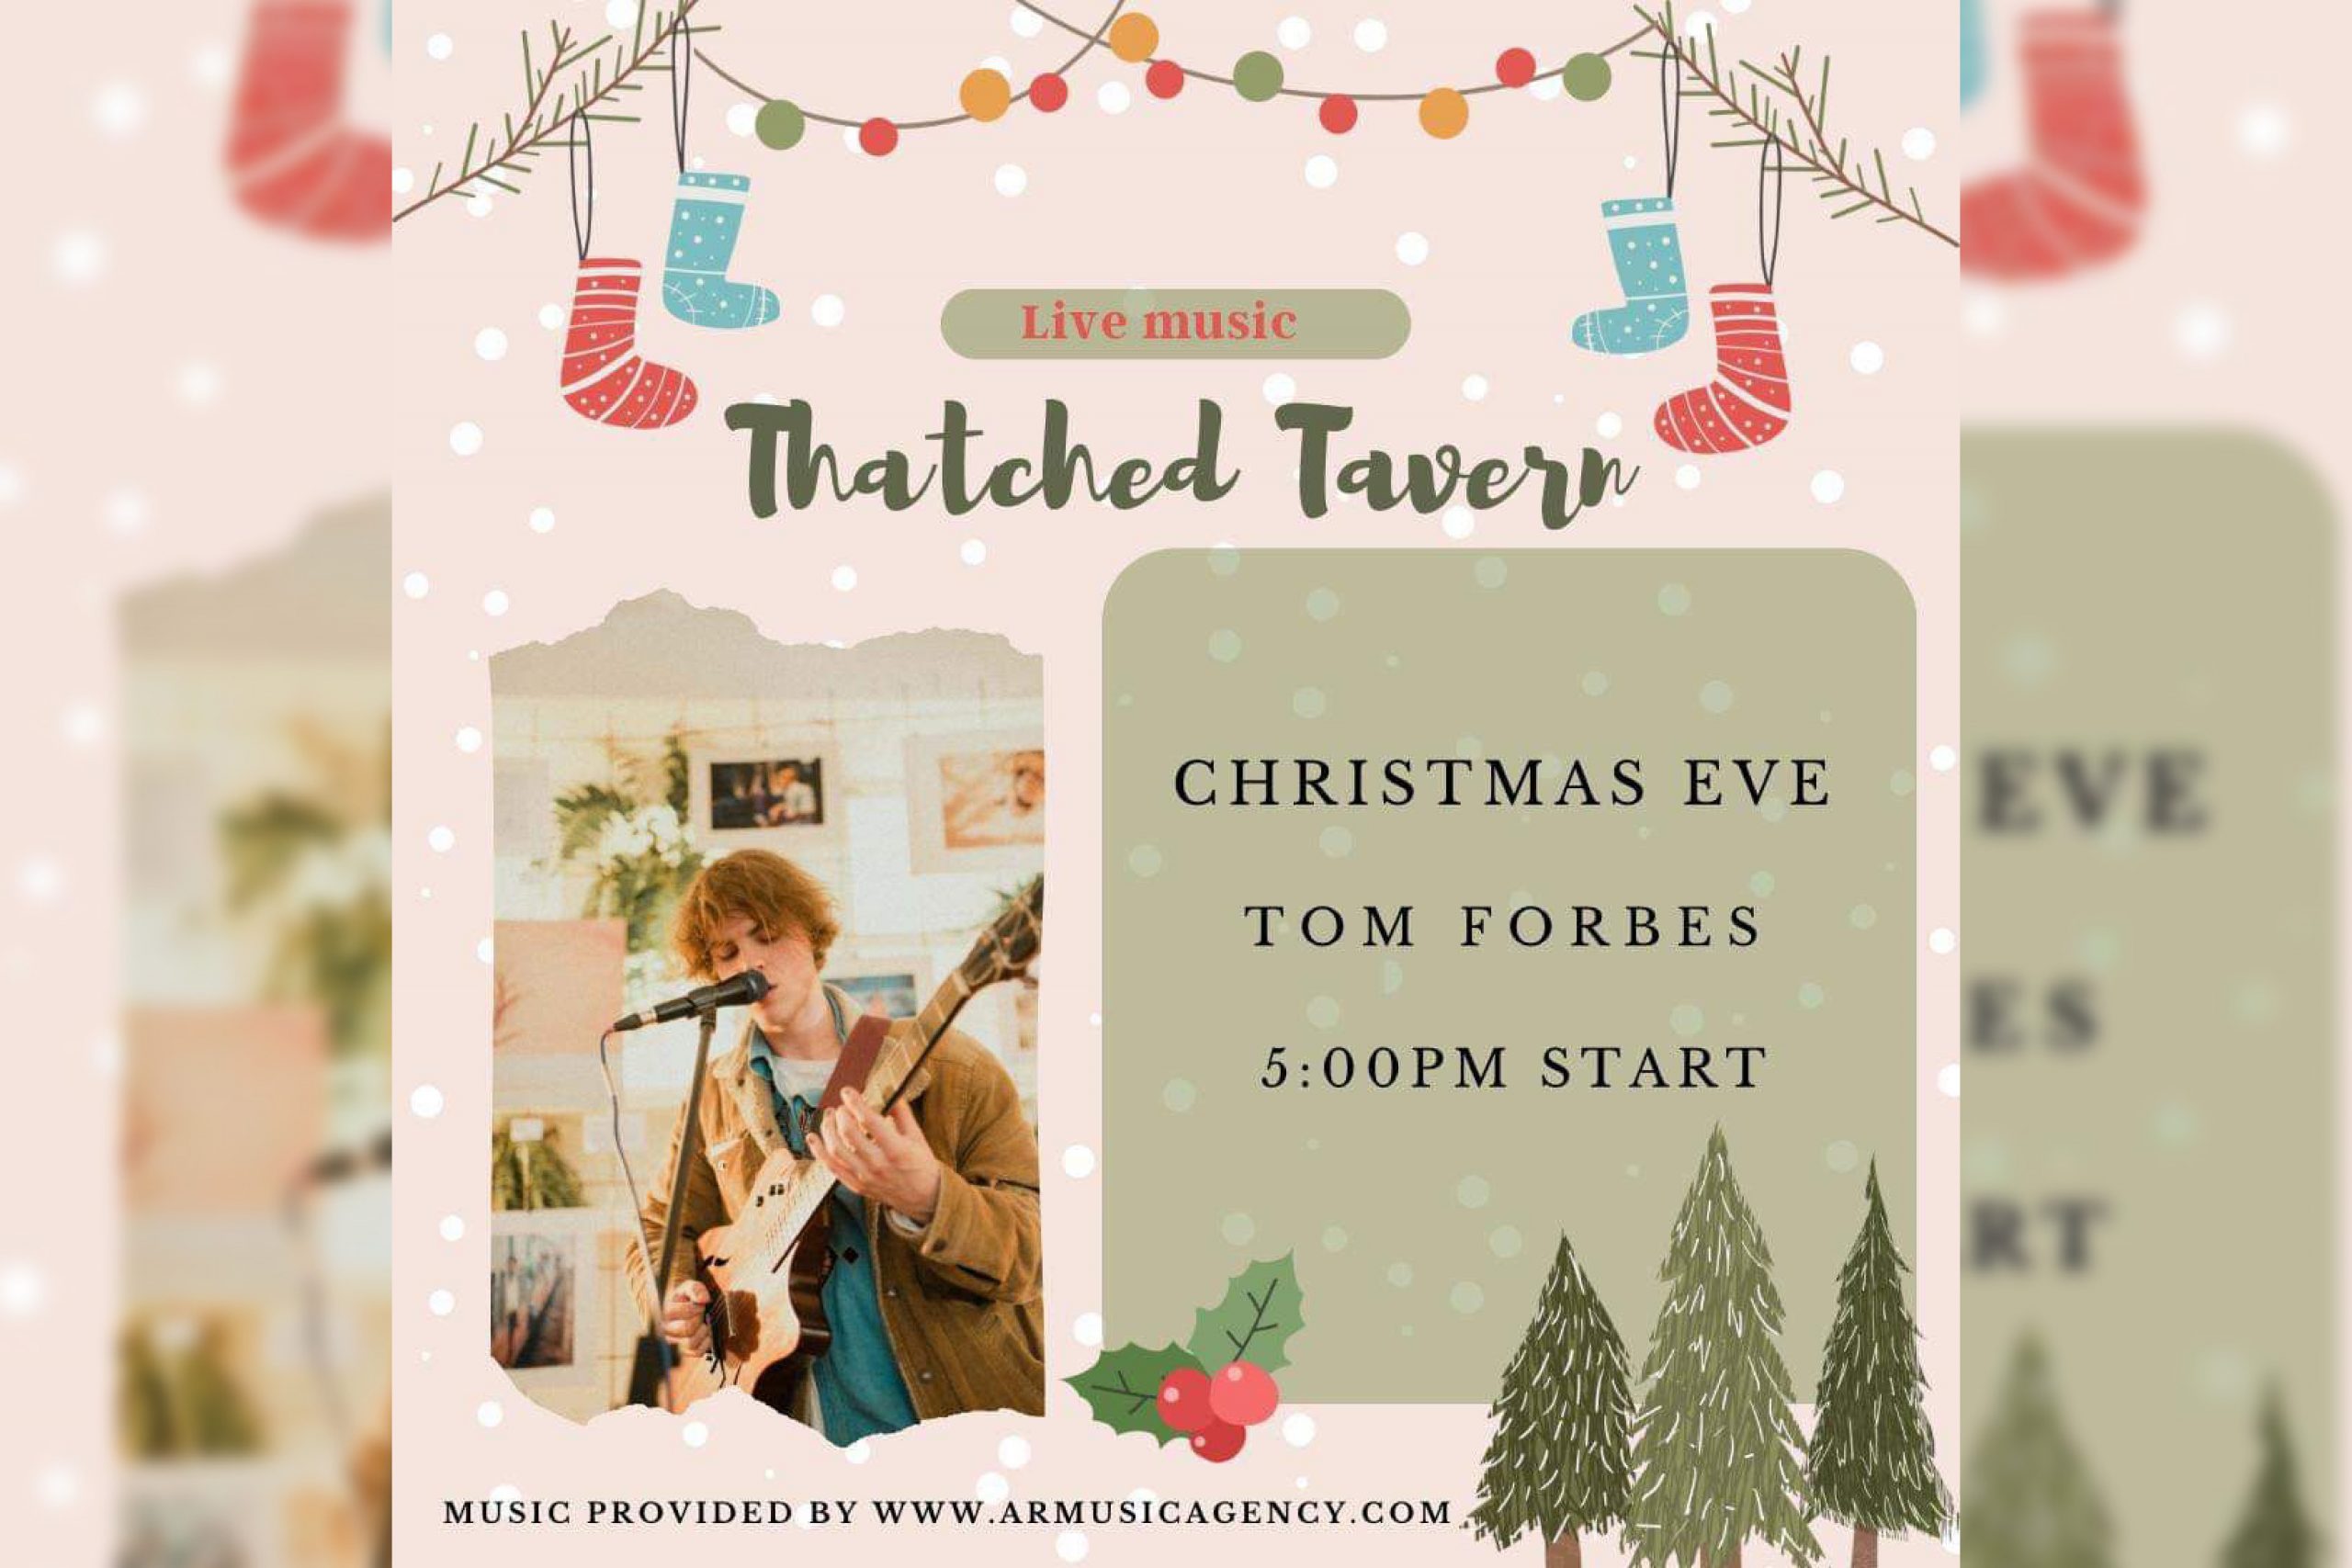 Live Music with Tom Forbes on Saturday 24th December 2022 from 5pm